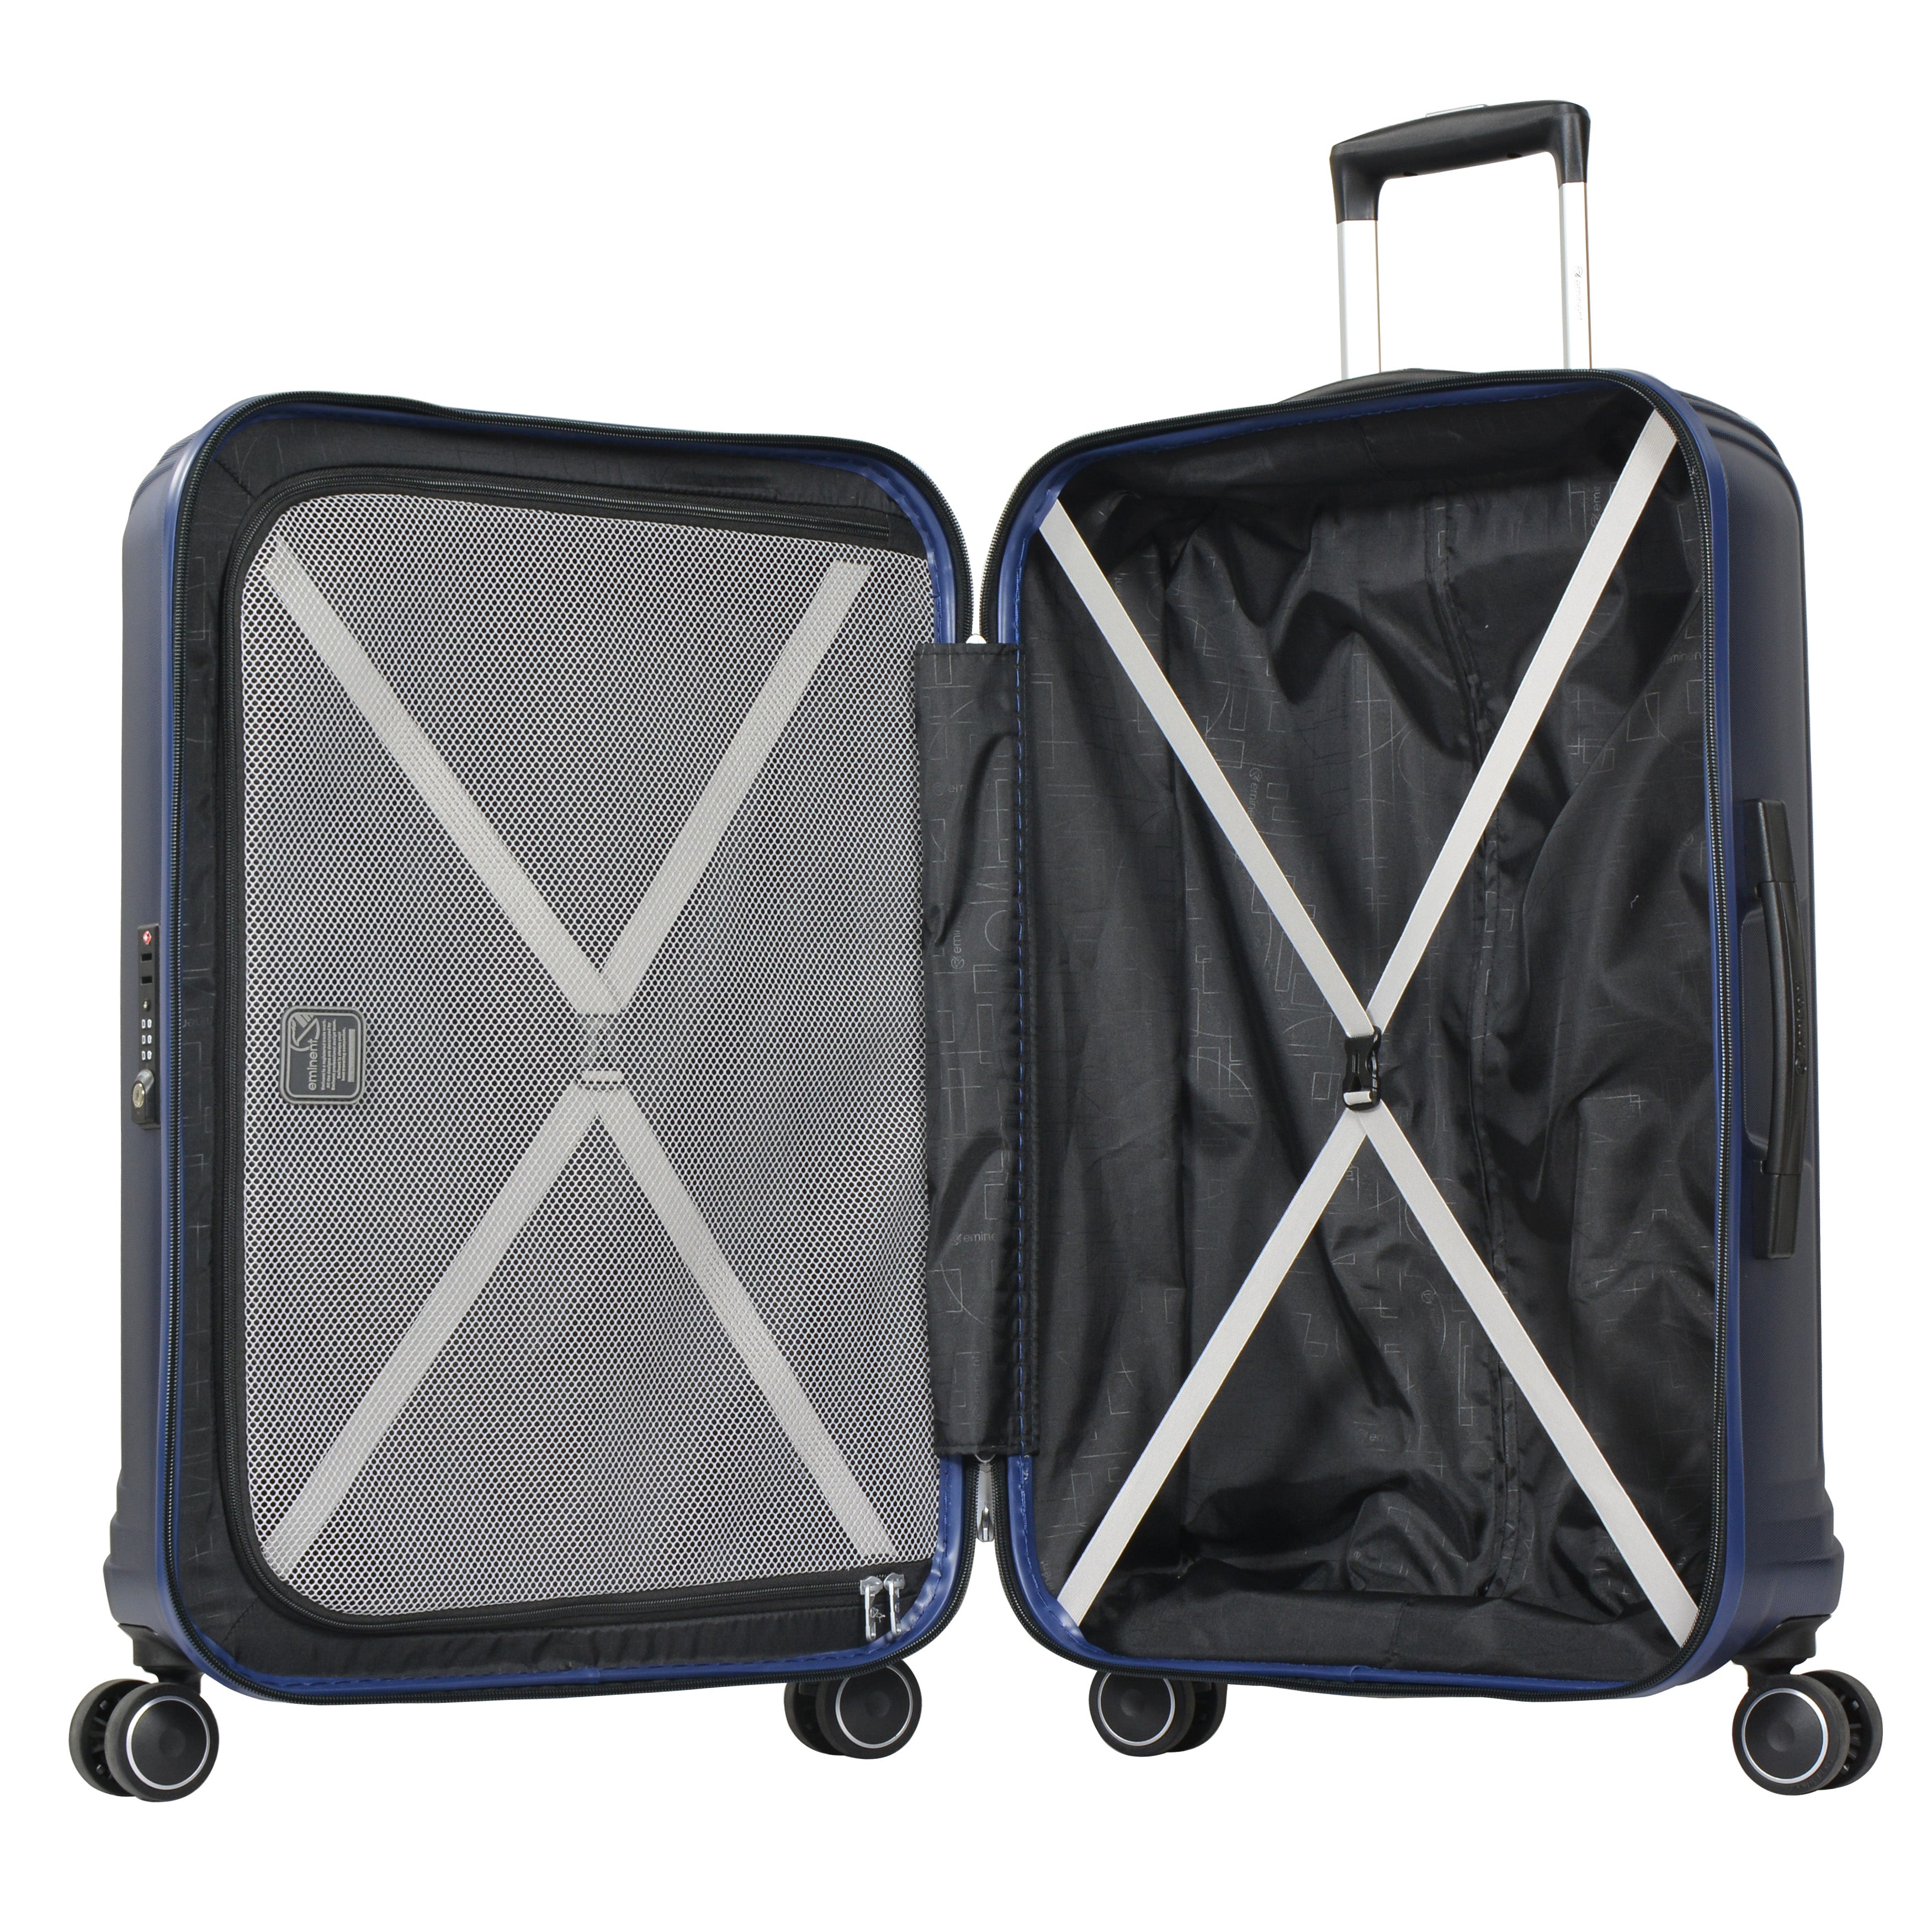 24" PC Zipper Spinner checked baggage trolley by Eminent (KJ09-24) - buyluggageonline